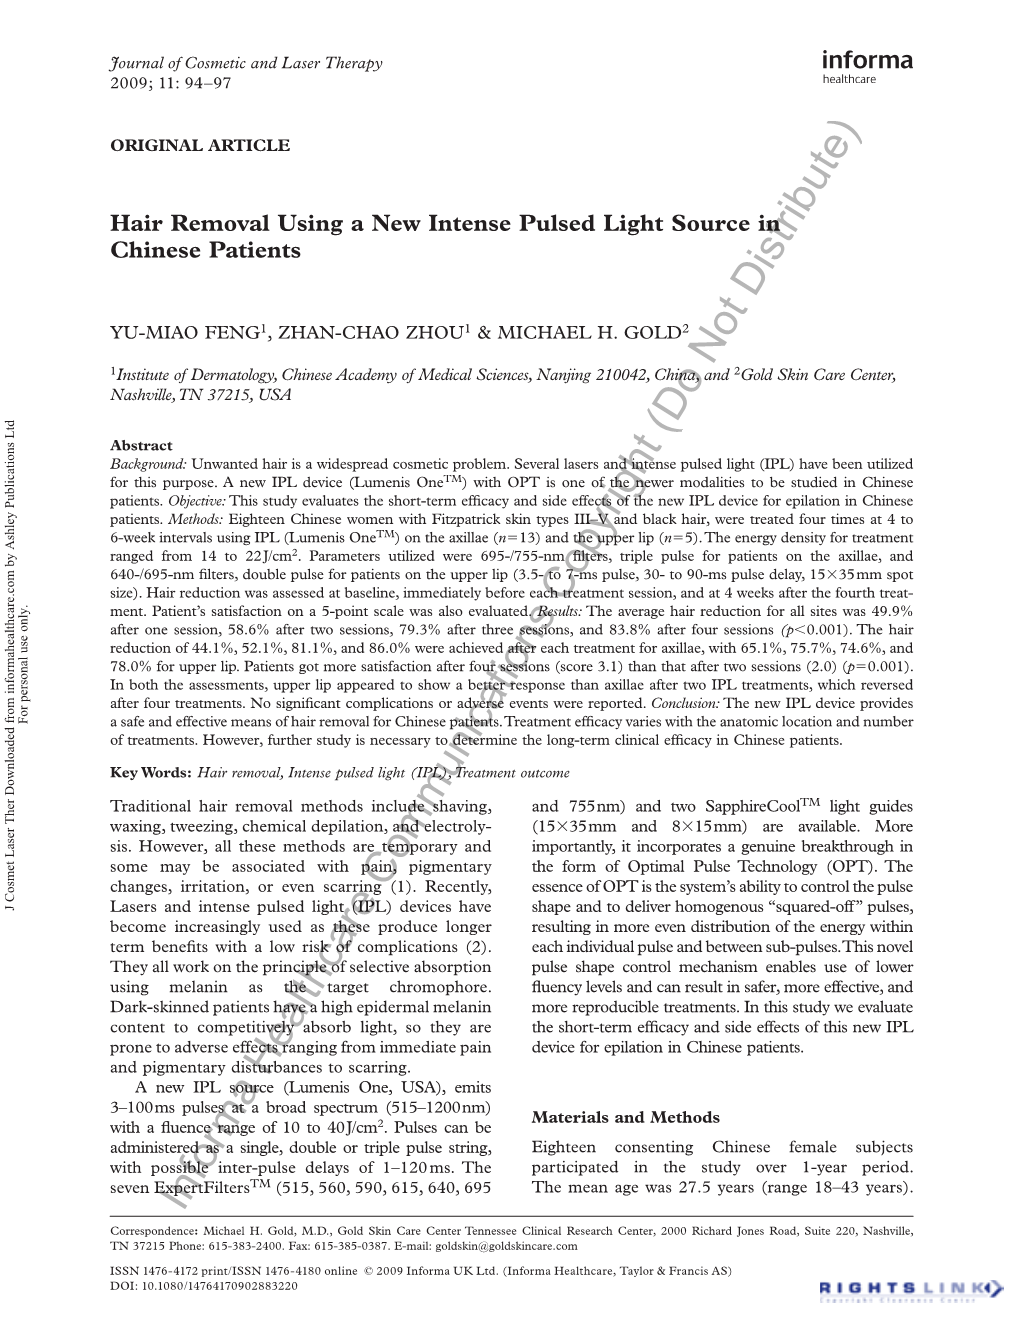 Hair Removal Using a New Intense Pulsed Light Source in Chinese Patients Distribute) YU-MIAO FENG1, ZHAN-CHAO ZHOU1 & MICHAEL H